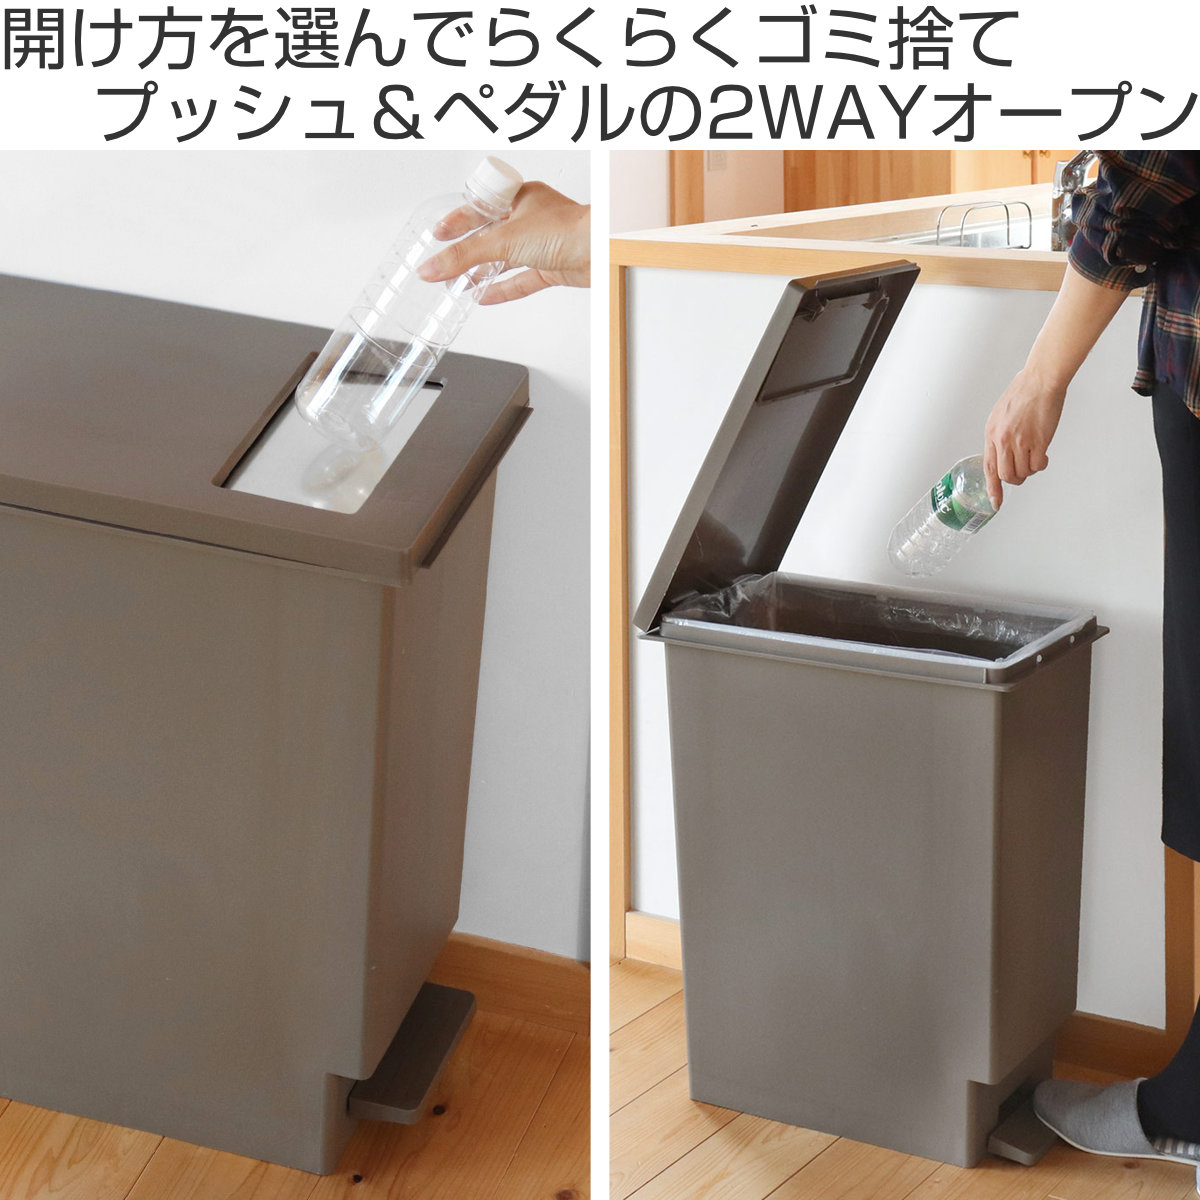  waste basket 45L pedal yu need push & pedal ( 45 liter cover attaching minute another kitchen dumpster slim minute another waste basket shelves under counter under )